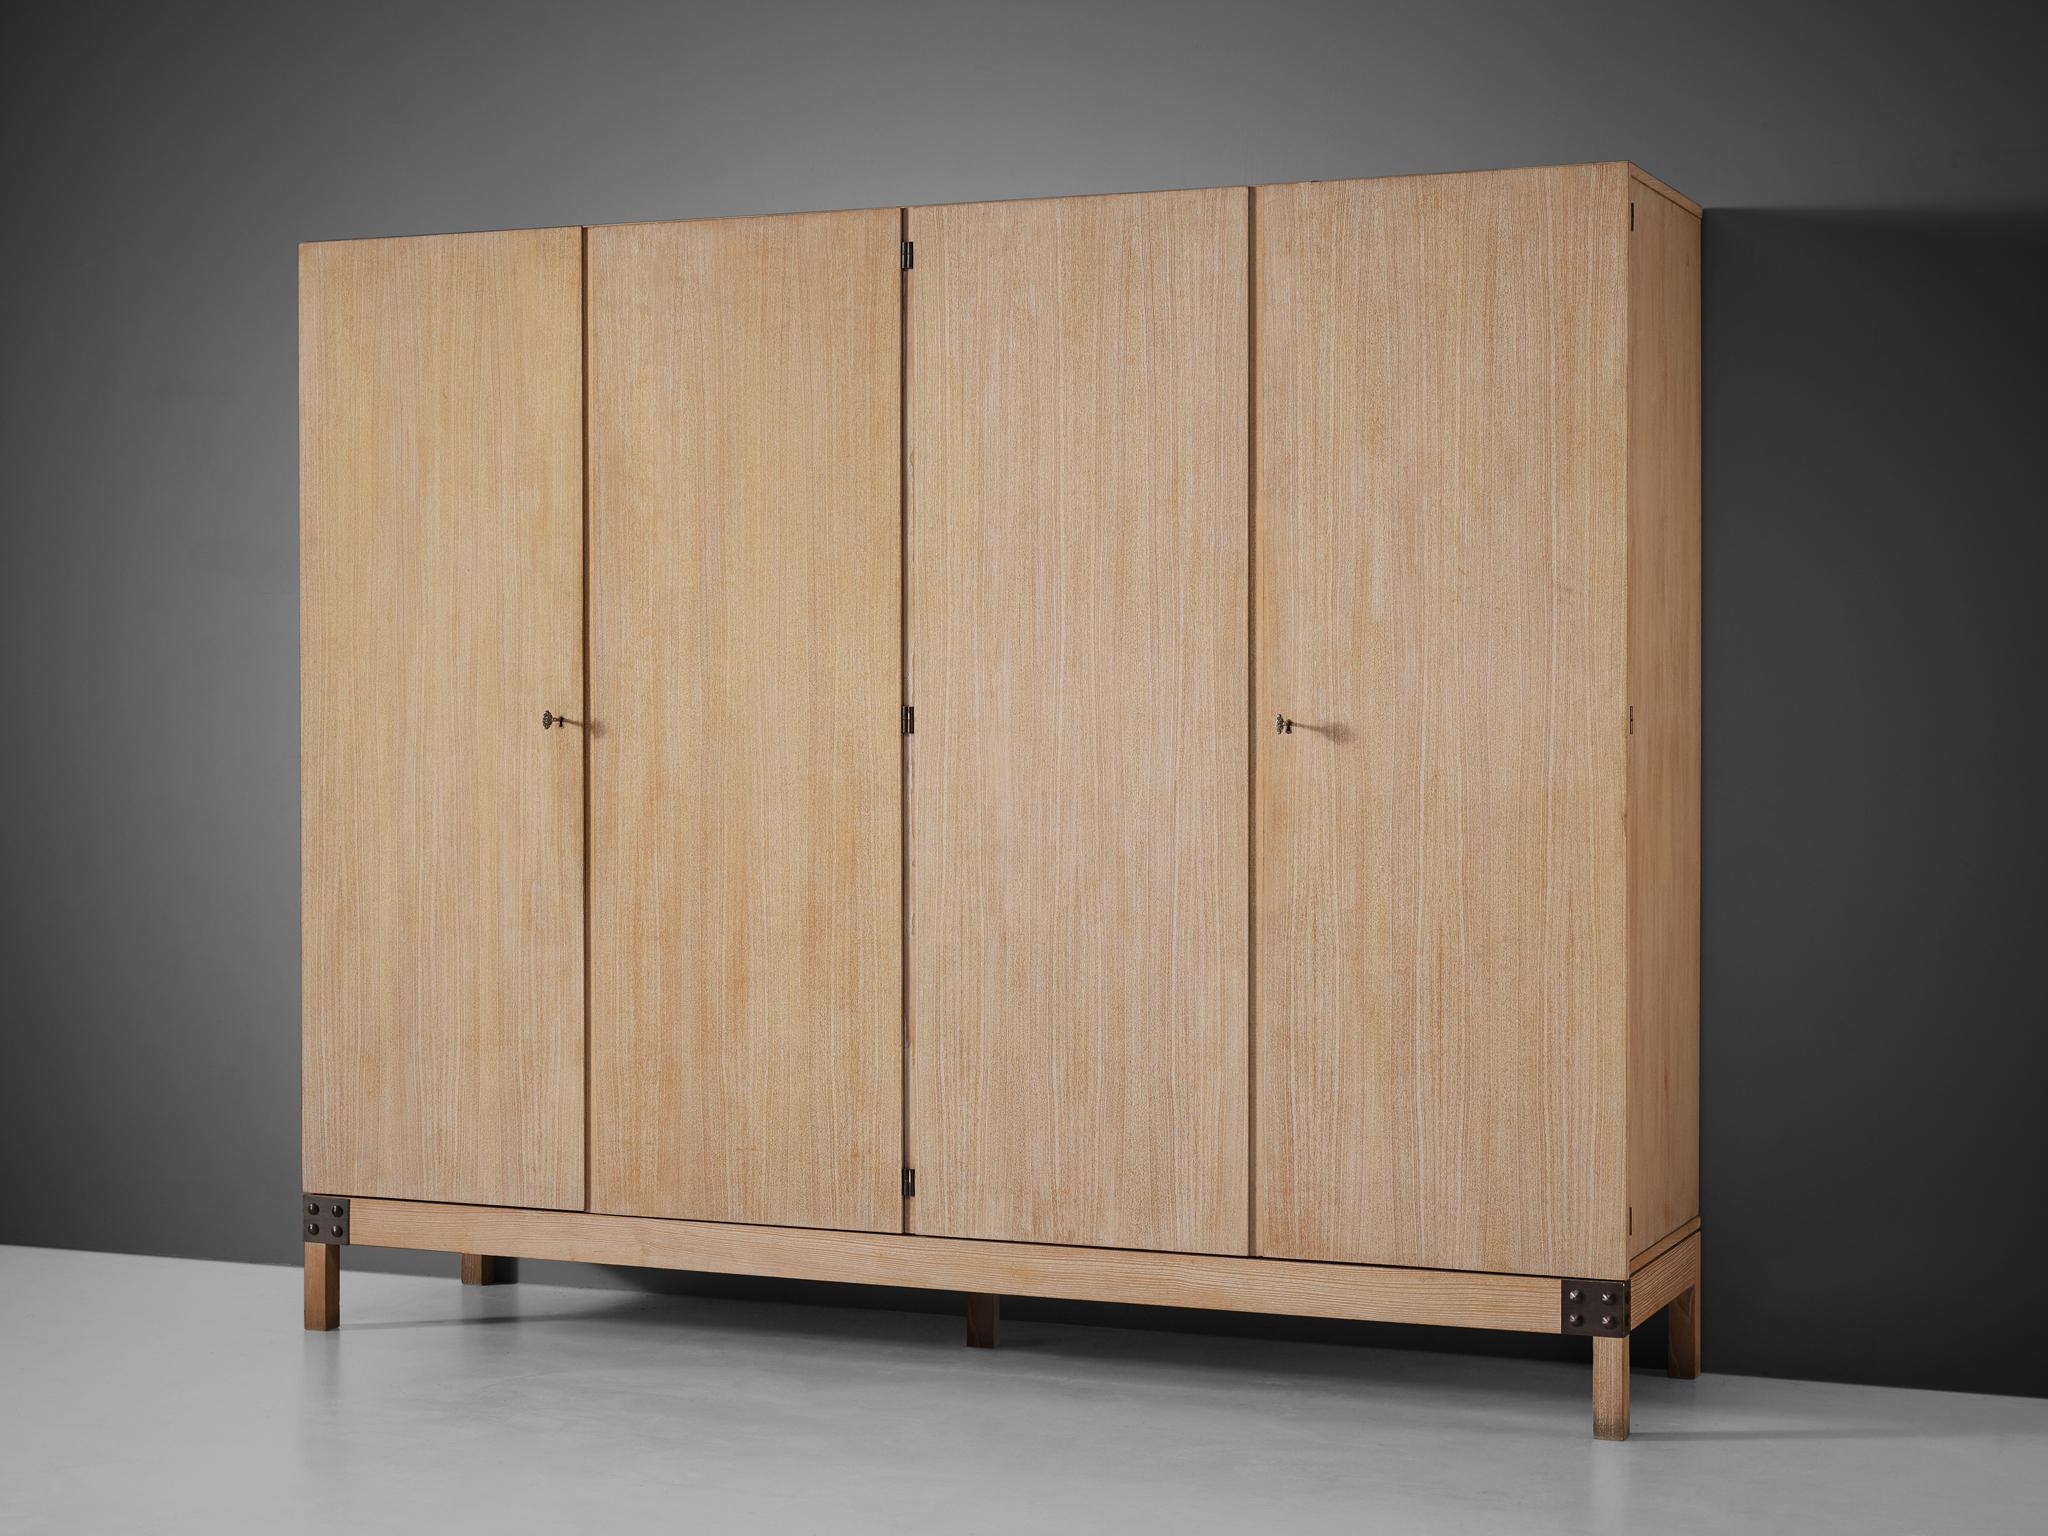 De Coene, wardrobe, model 'Yvette', white stained oak, metal, Belgium, 1970s.

This rare wardrobe is manufactured by De Coene and features a body made of white stained oak with four doors. The interior has a wonderfully practical layout with